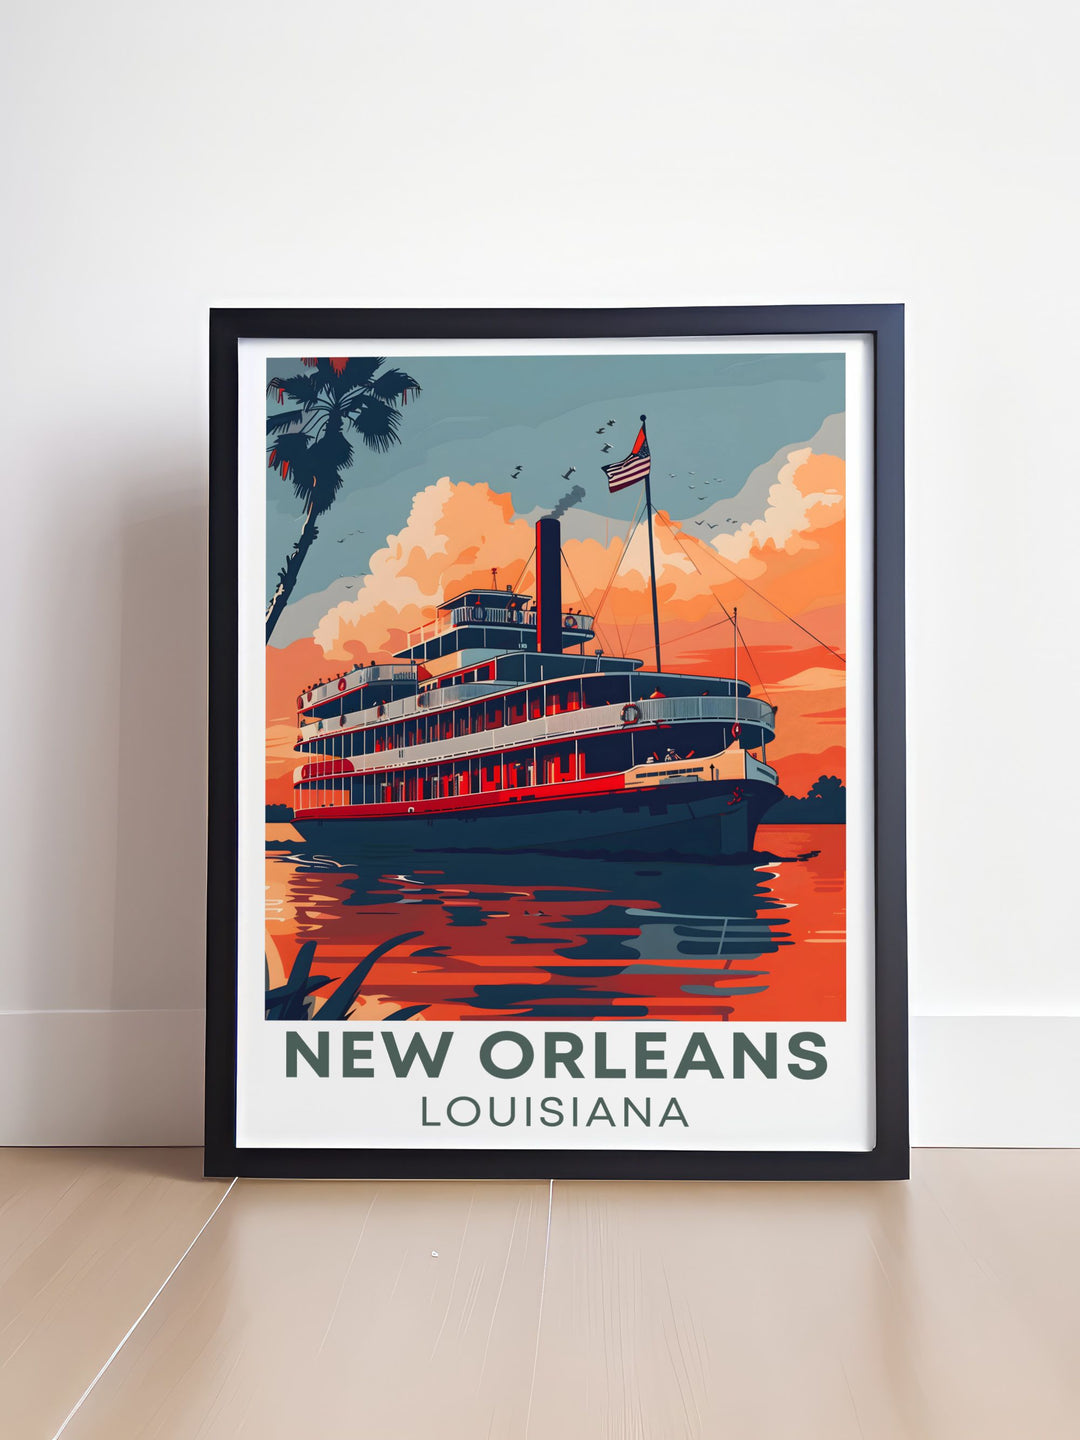 Captivating Steamboat Natchez artwork highlighting the beauty of the Mississippi River in New Orleans a perfect piece for those who love Louisiana travel art and want to bring a touch of elegance to their home or as a unique gift